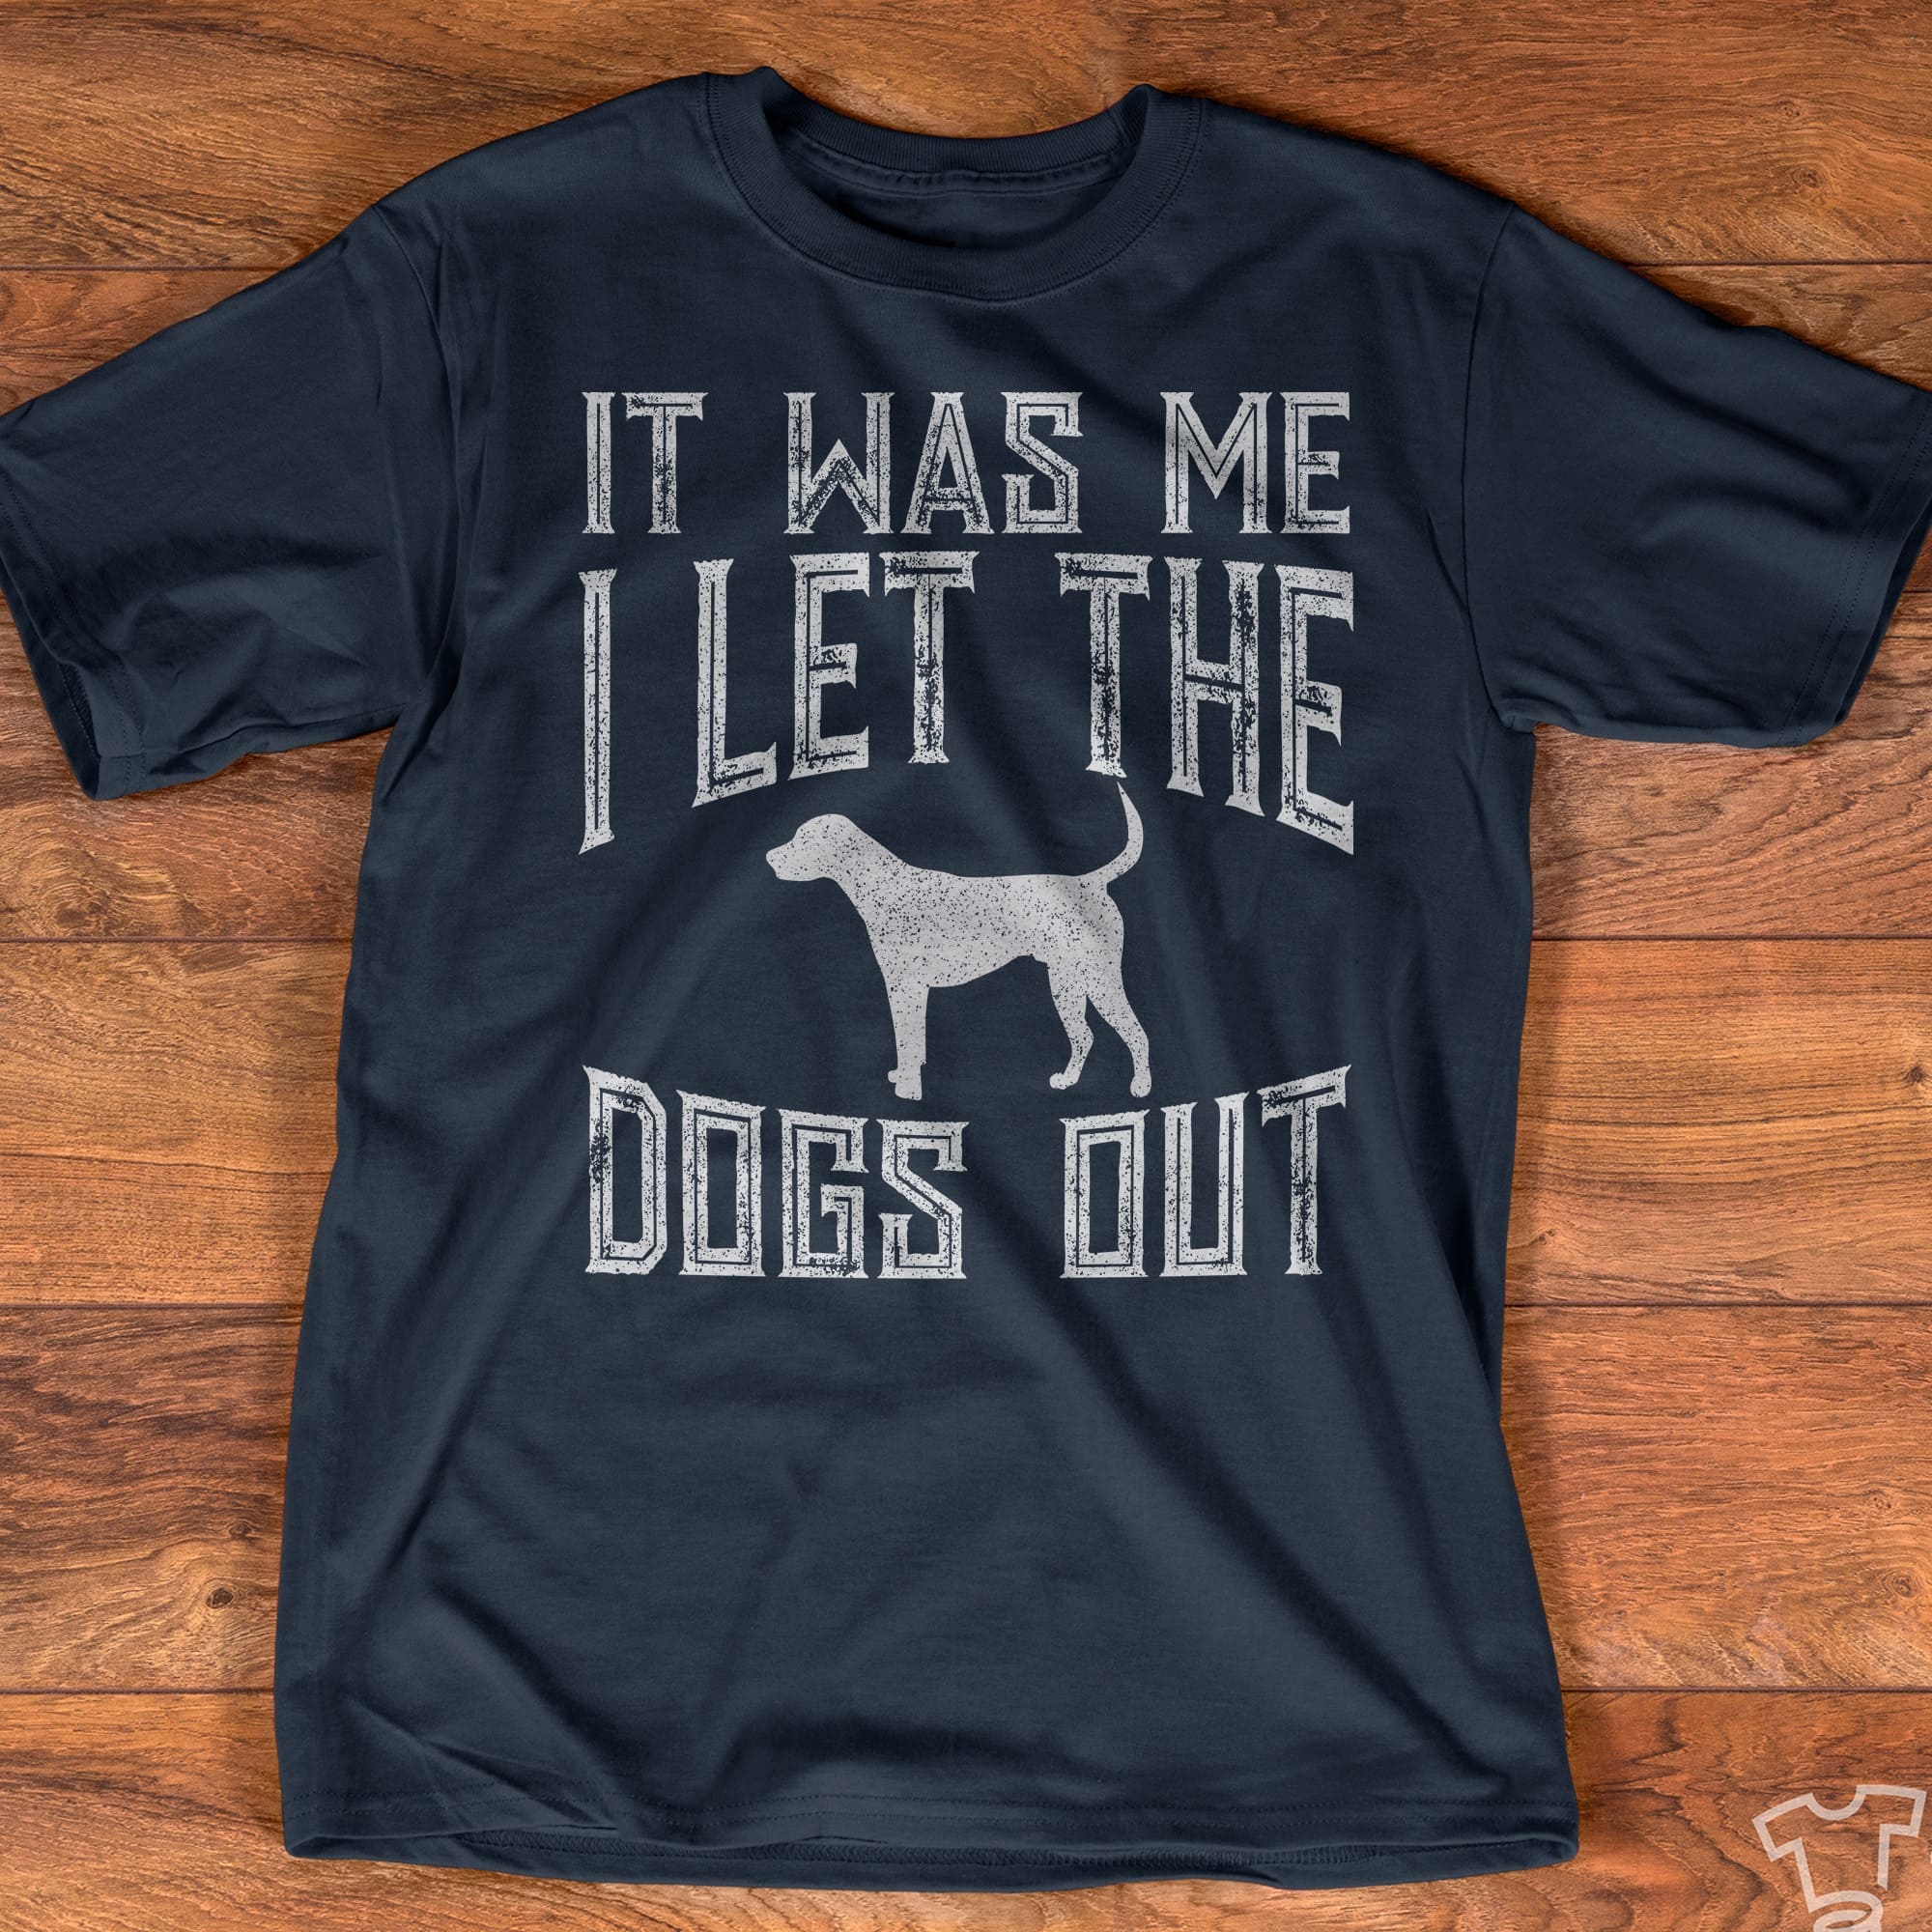 It was me I let the dogs out - Dog lover T-shirt, rescueing the dogs